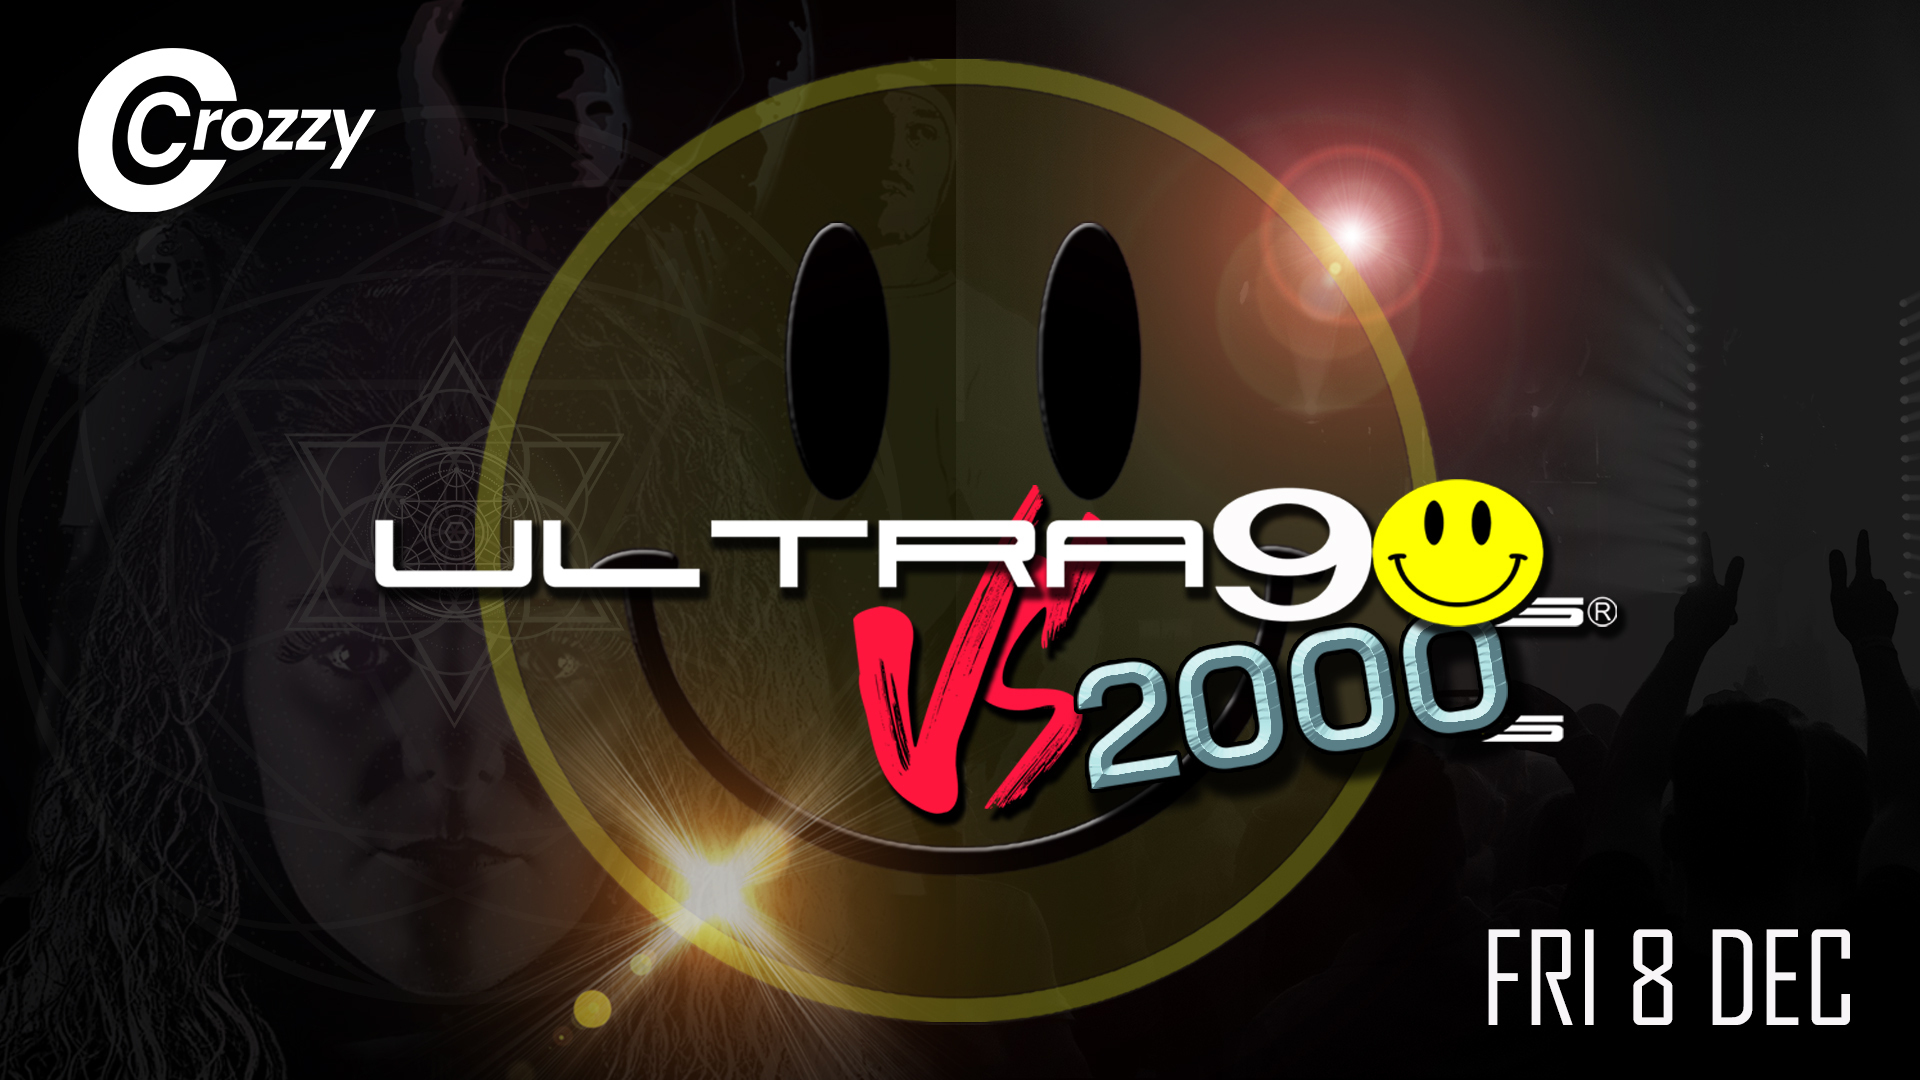 Ultra 90s Vs 2000s - Xmas Special - Last Chance at The Crozzy, Crewe - Fri 8th Dec 2023, Crewe, England, United Kingdom